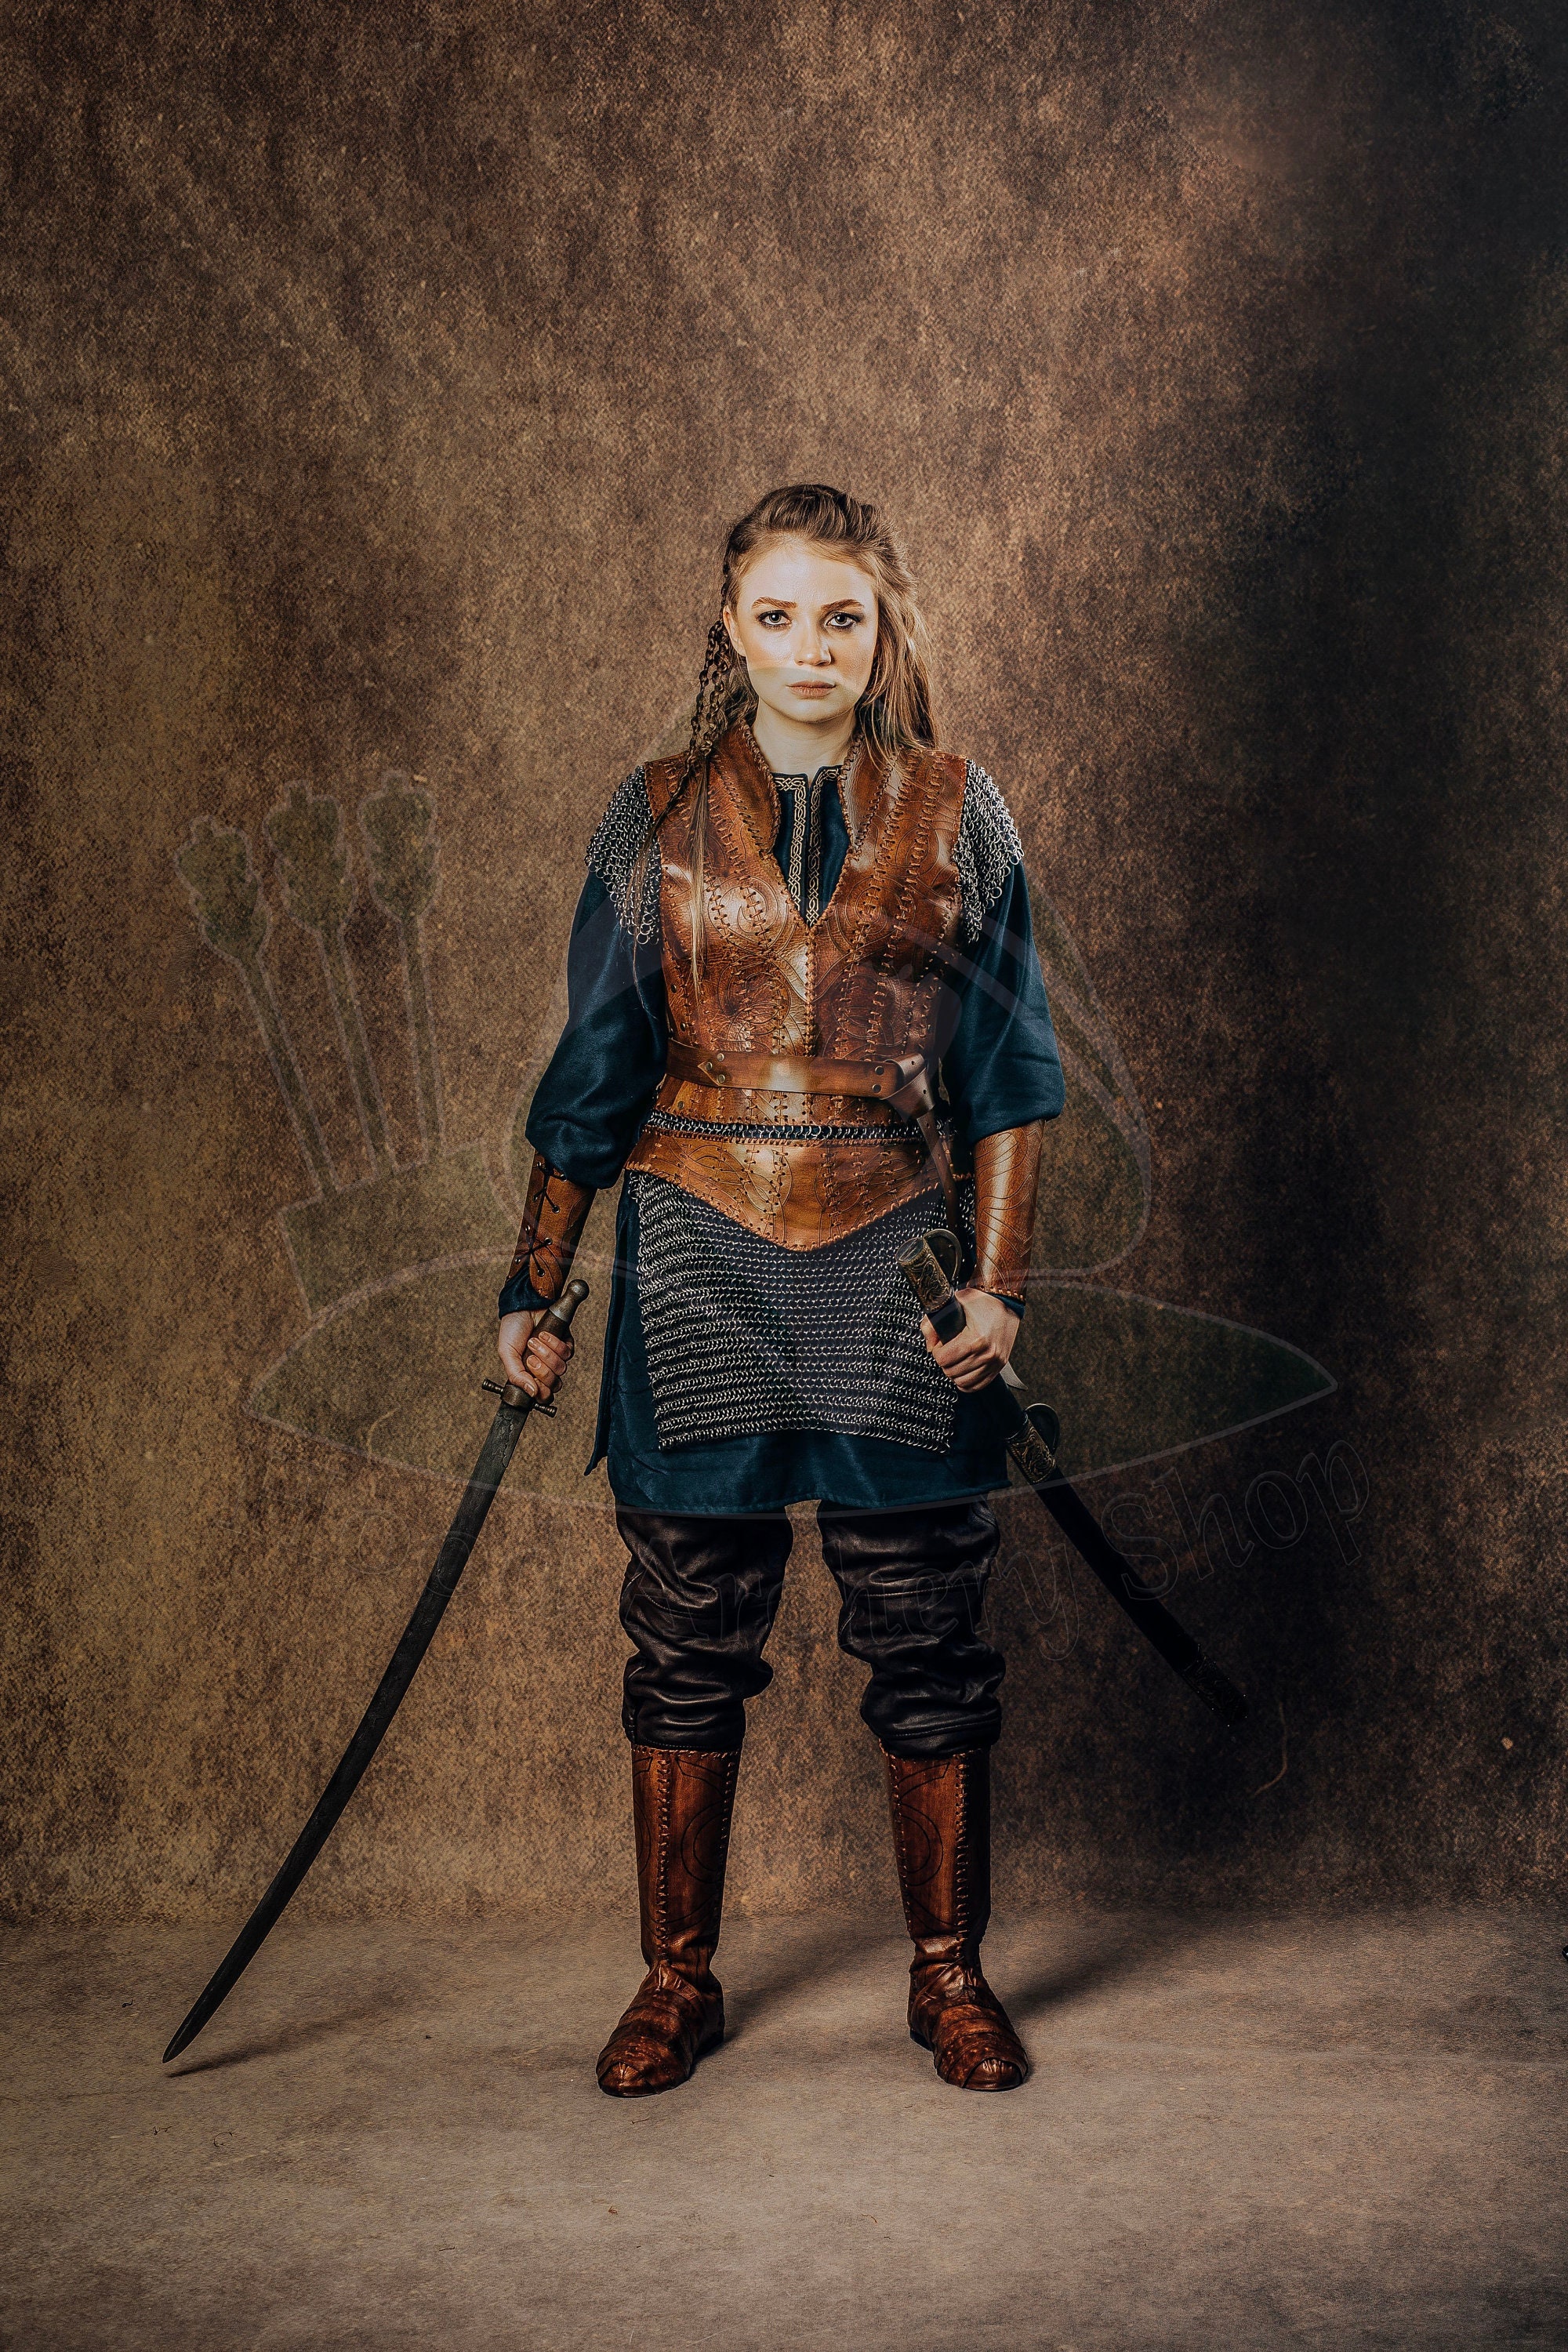 Shield-maidens: Top Five Female Warriors in Viking History - Viking Front